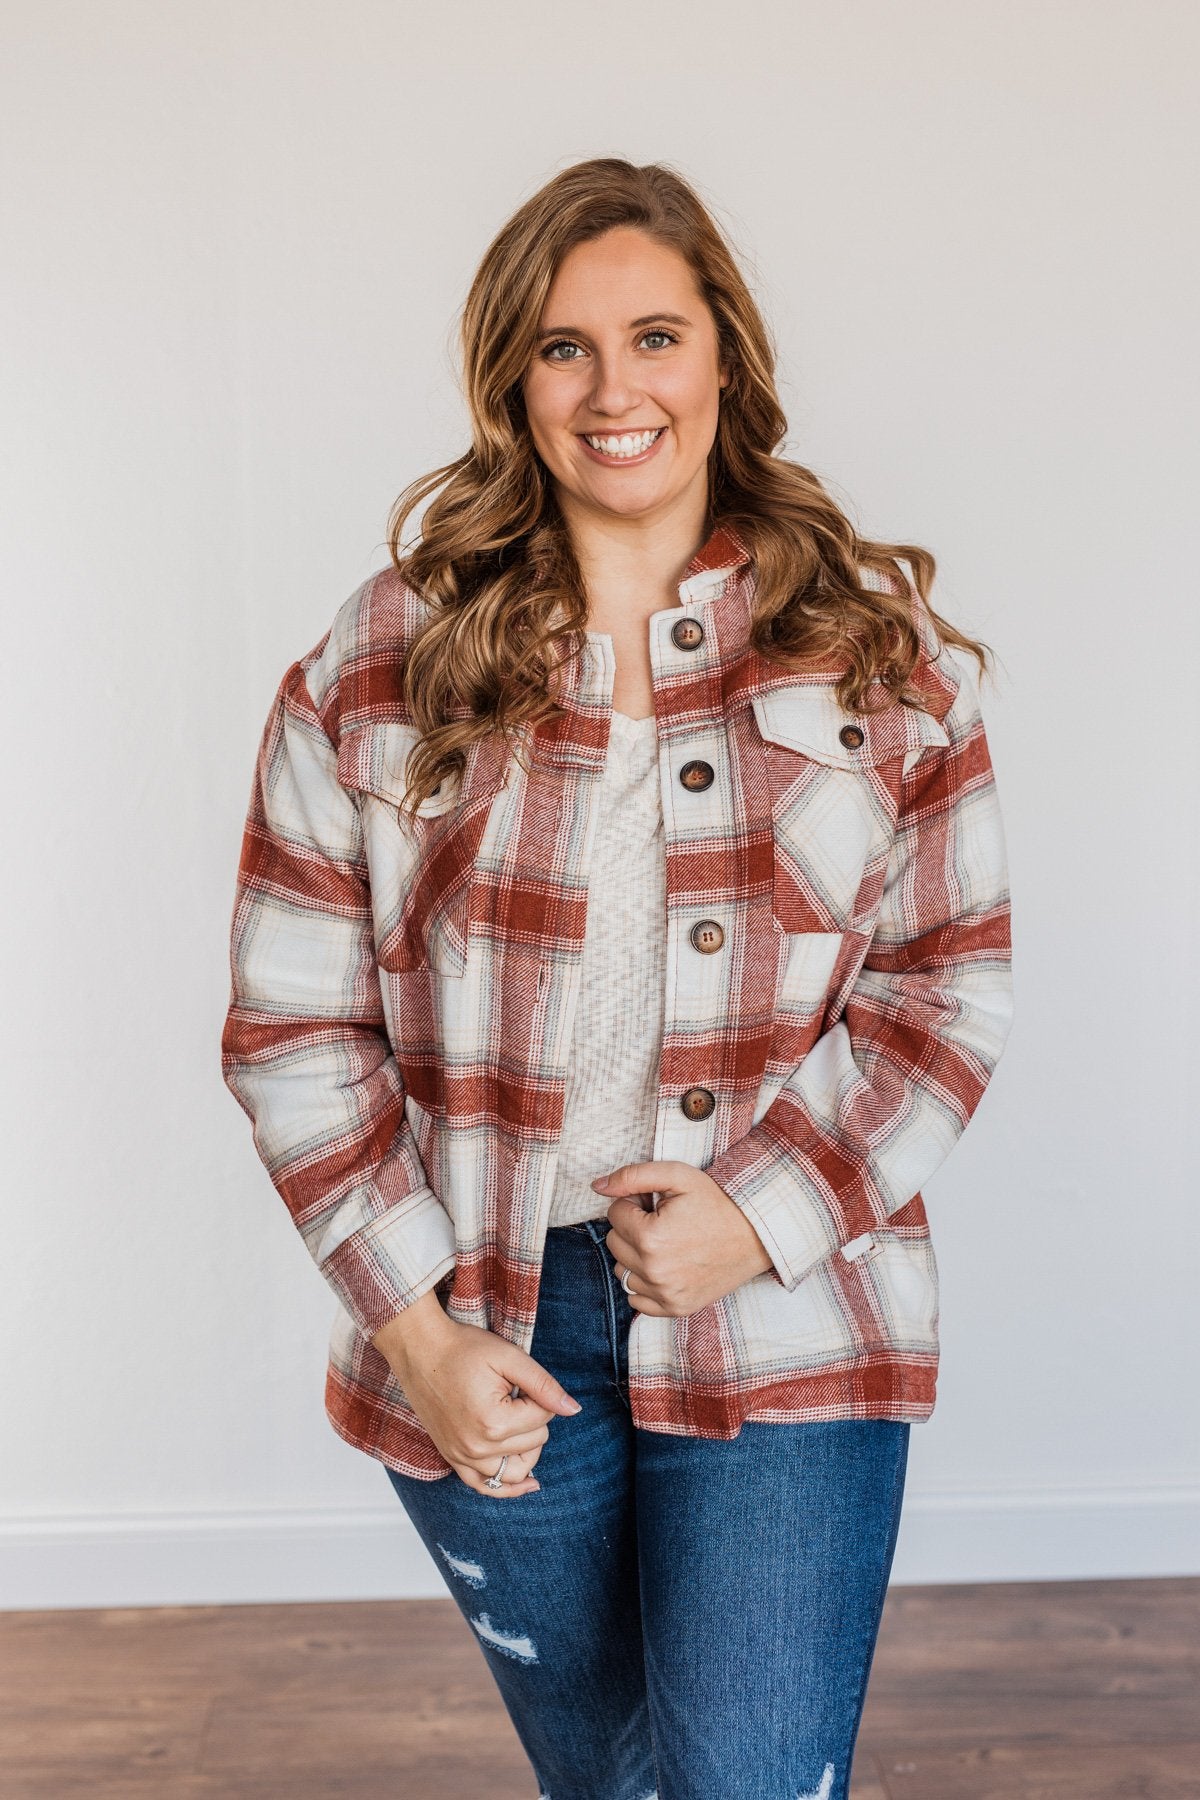 Cover Me Up Sherpa Lined Jacket- Terra Cotta – The Pulse Boutique